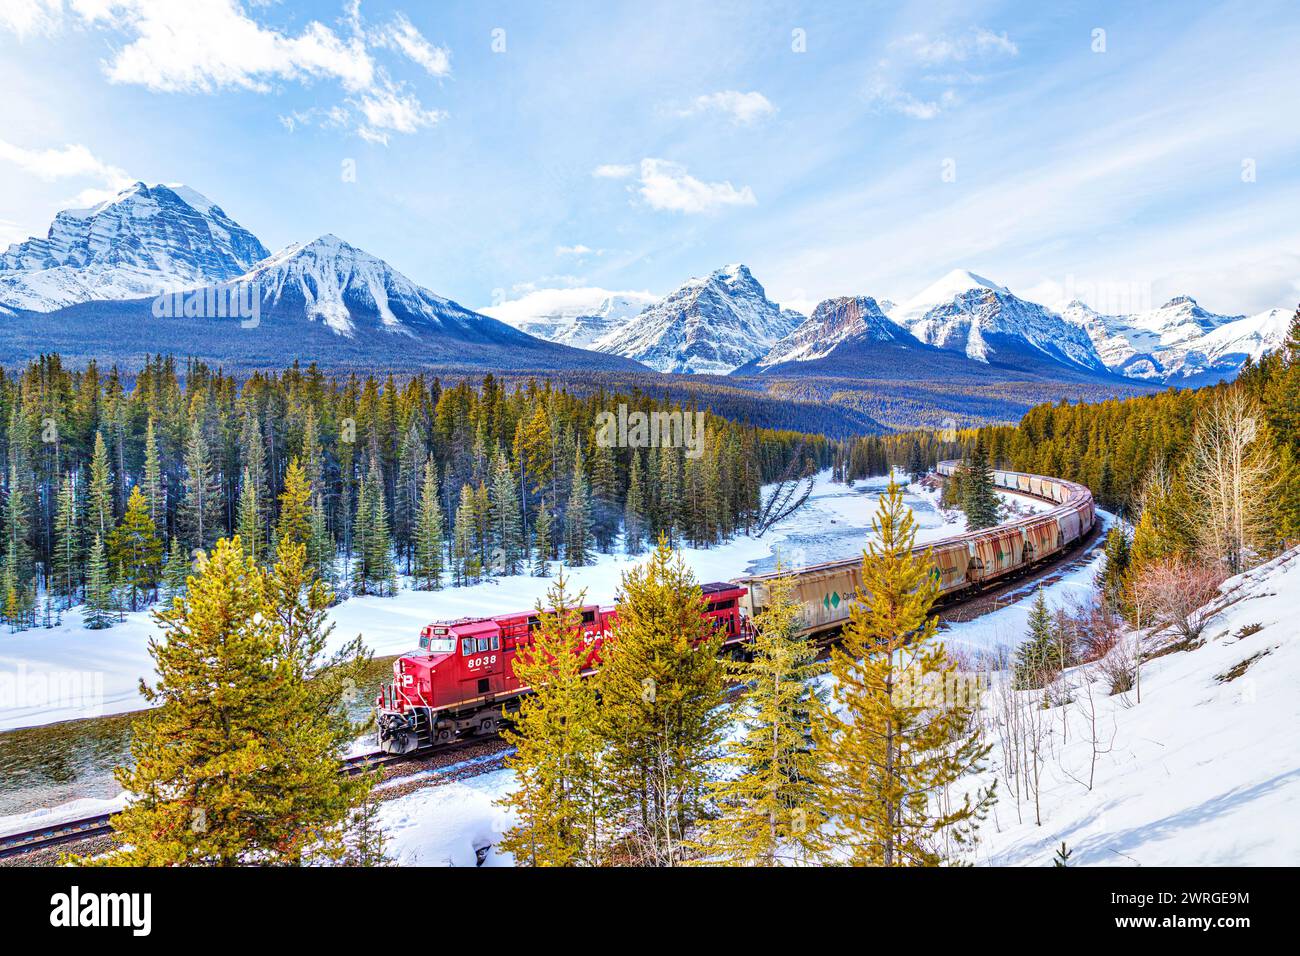 BANFF, CANADA - FEB. 22, 2024: Canadian Pacific Railway cargo train passes through Morant's curve in the Bow Valley of Banff National Park during wint Stock Photo